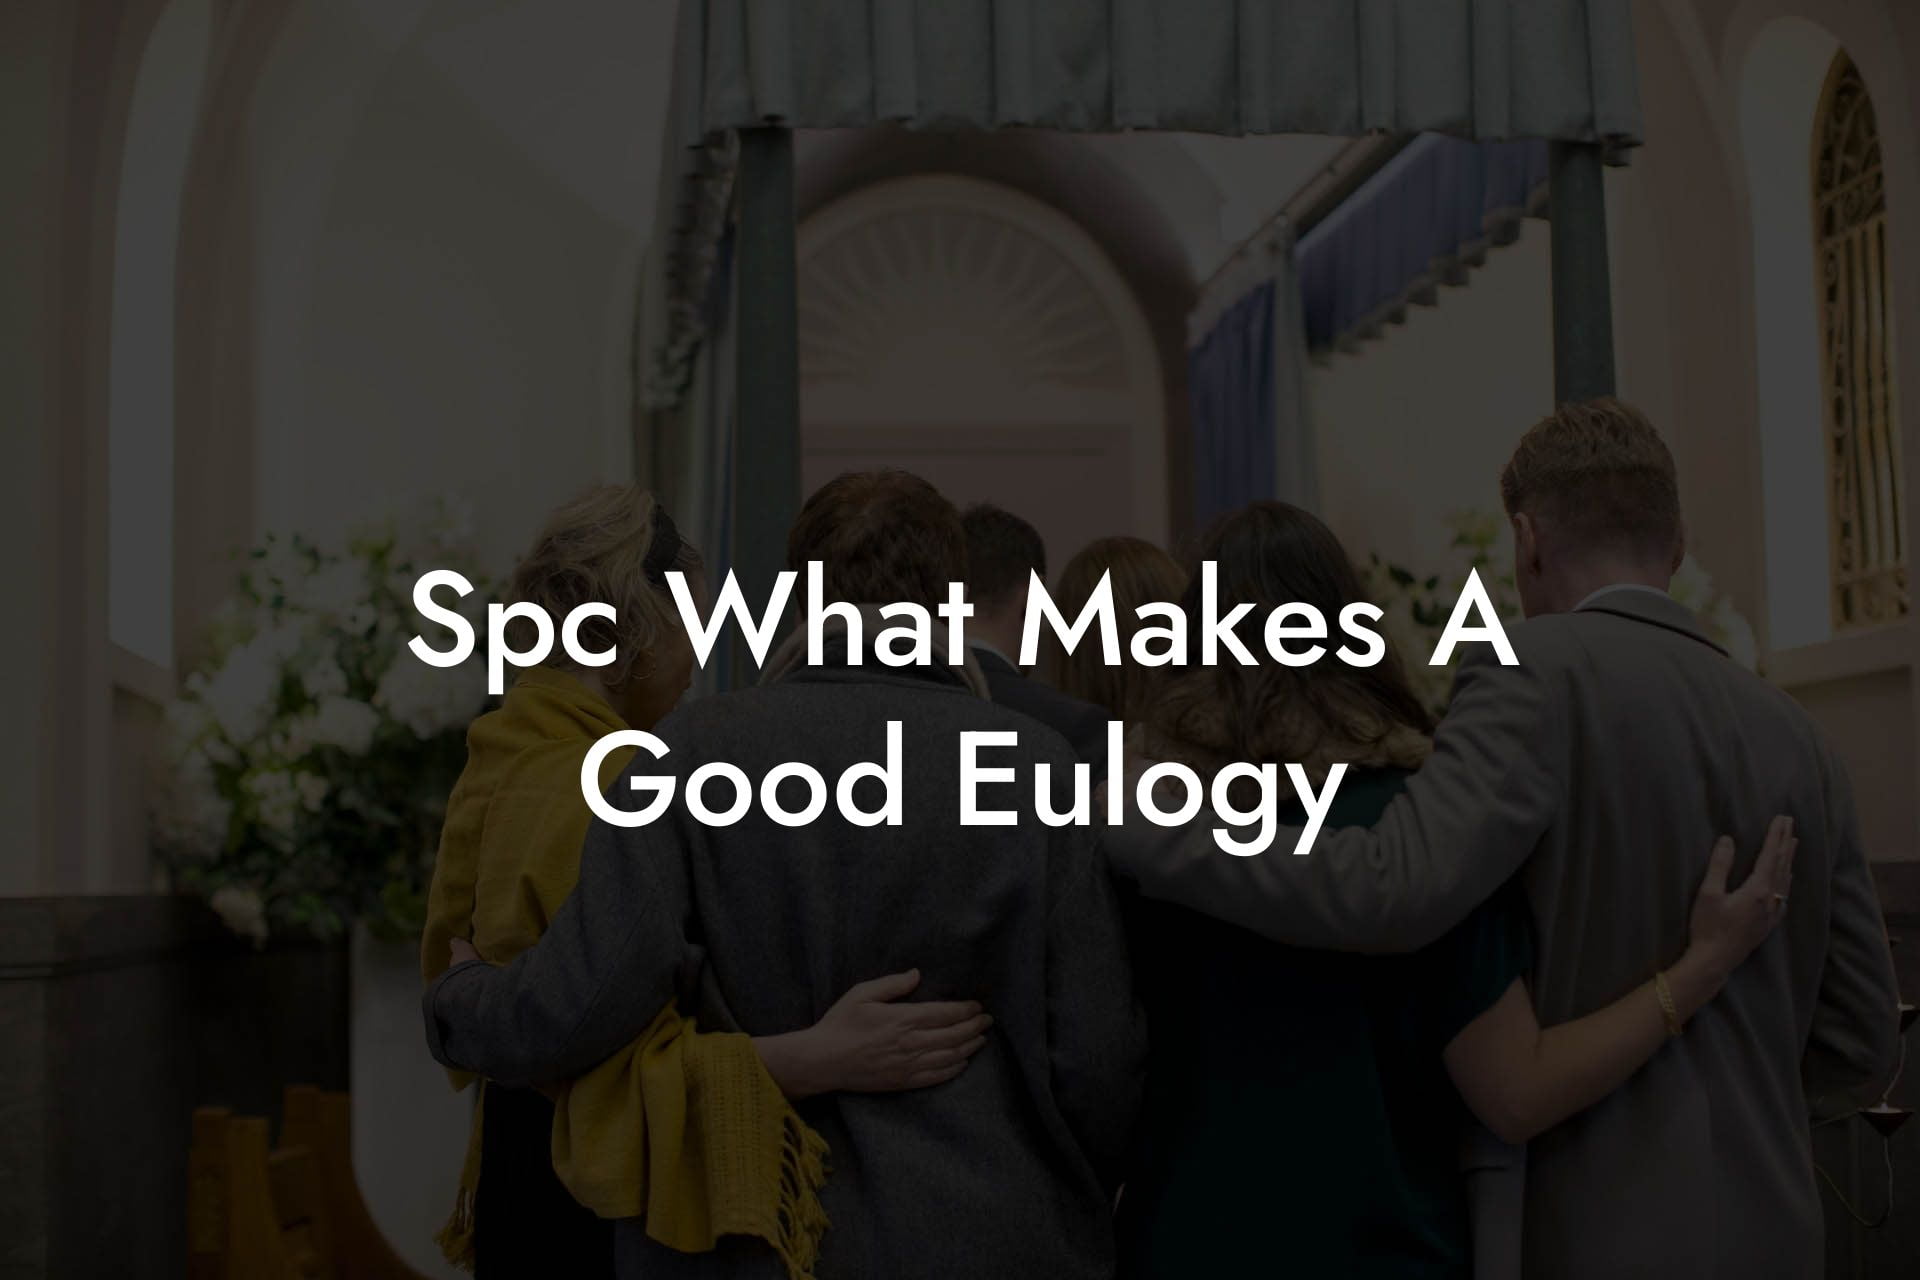 Spc What Makes A Good Eulogy